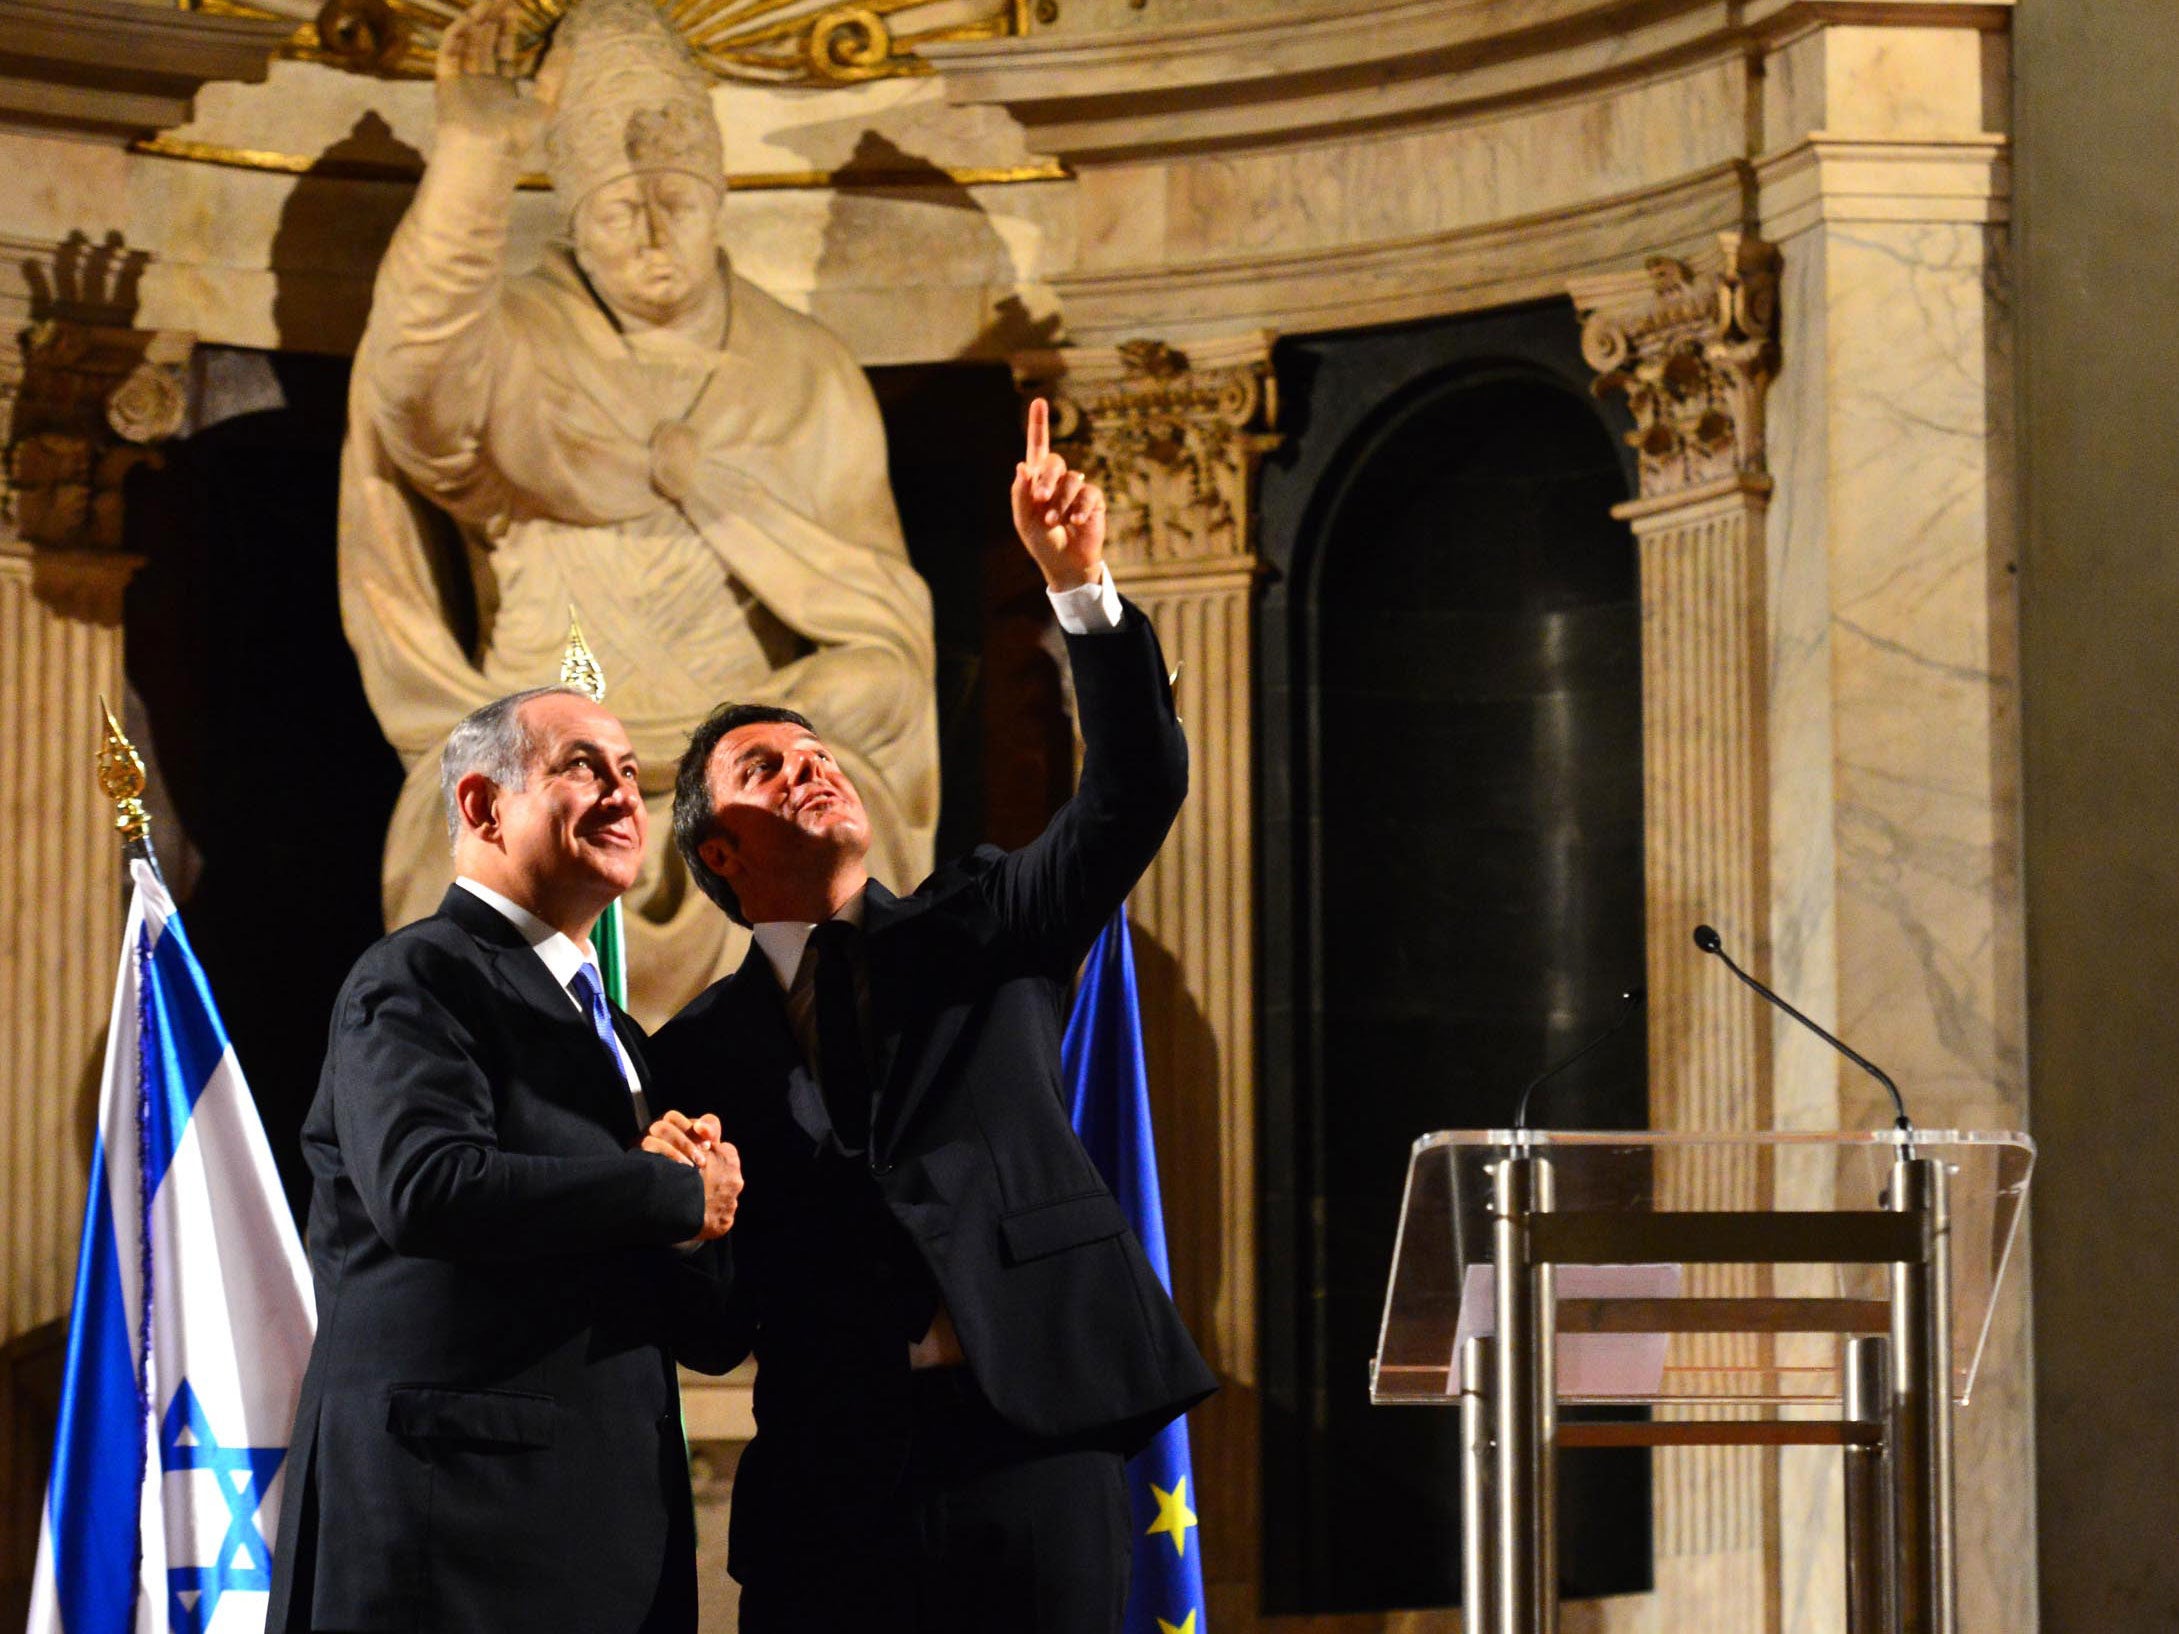 Isreali Prime Minister Benjamin Netanyahu meets with Italian Prime Minister Matteo Renzi at the City Hall of Florence